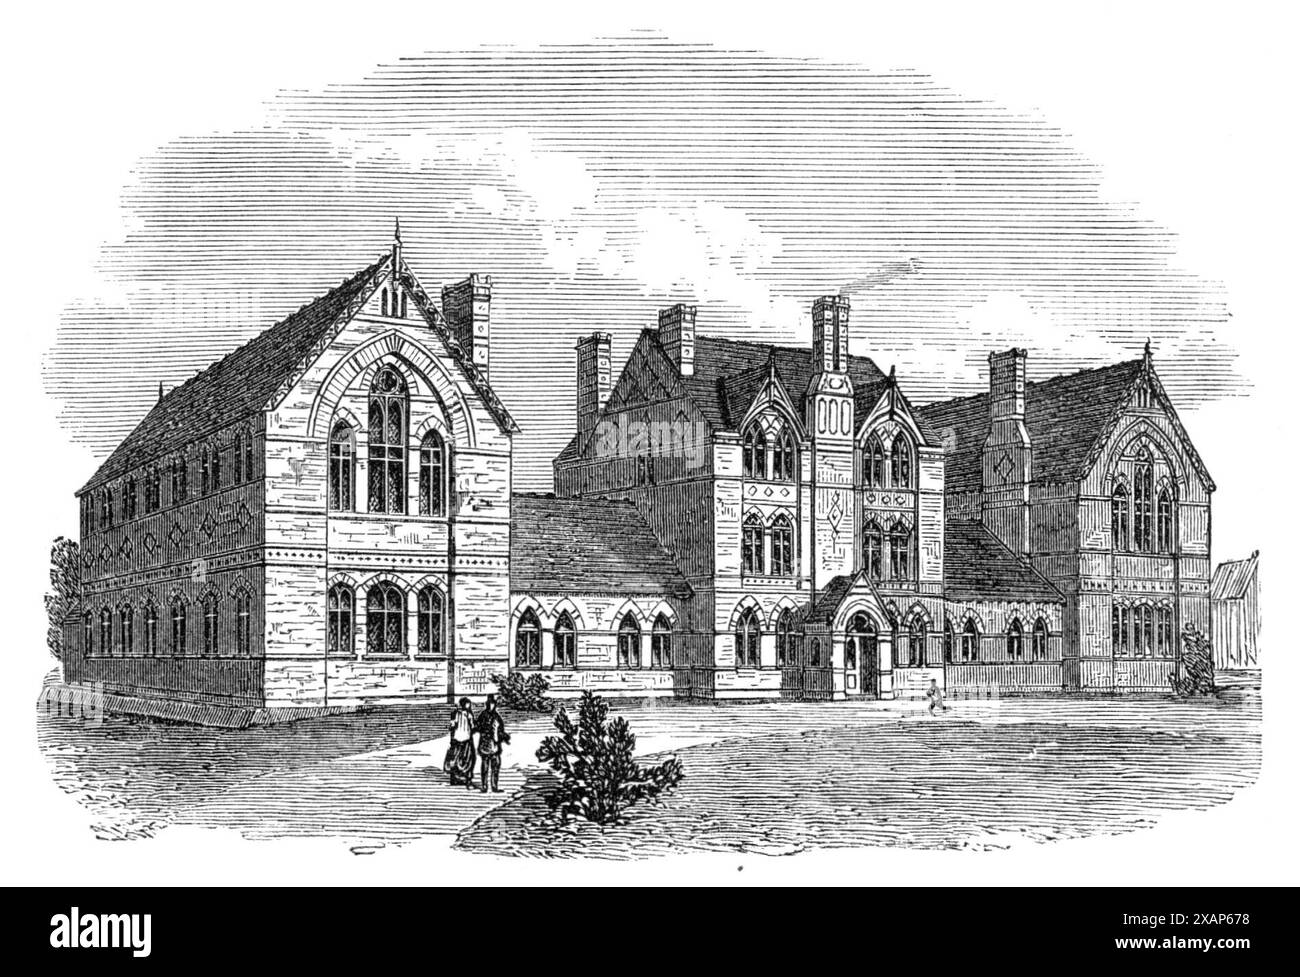 Home for Destitute Boys, Bisley, Surrey, 1869. An industrial '...farm-school...for the reformation and employment of the destitute and homeless boys of London...Last year there were gathered from the streets into the refuge no less than 350 boys, and still they come begging to be received...The building...is Early Gothic, and consists of a centre and two wings, connected by corridors. The centre contains committee-rooms, store-rooms, living-room for the master, and separate infirmaries. The west wing contains workshops for several departments, and over these is a fine spacious dormitory...In t Stock Photo